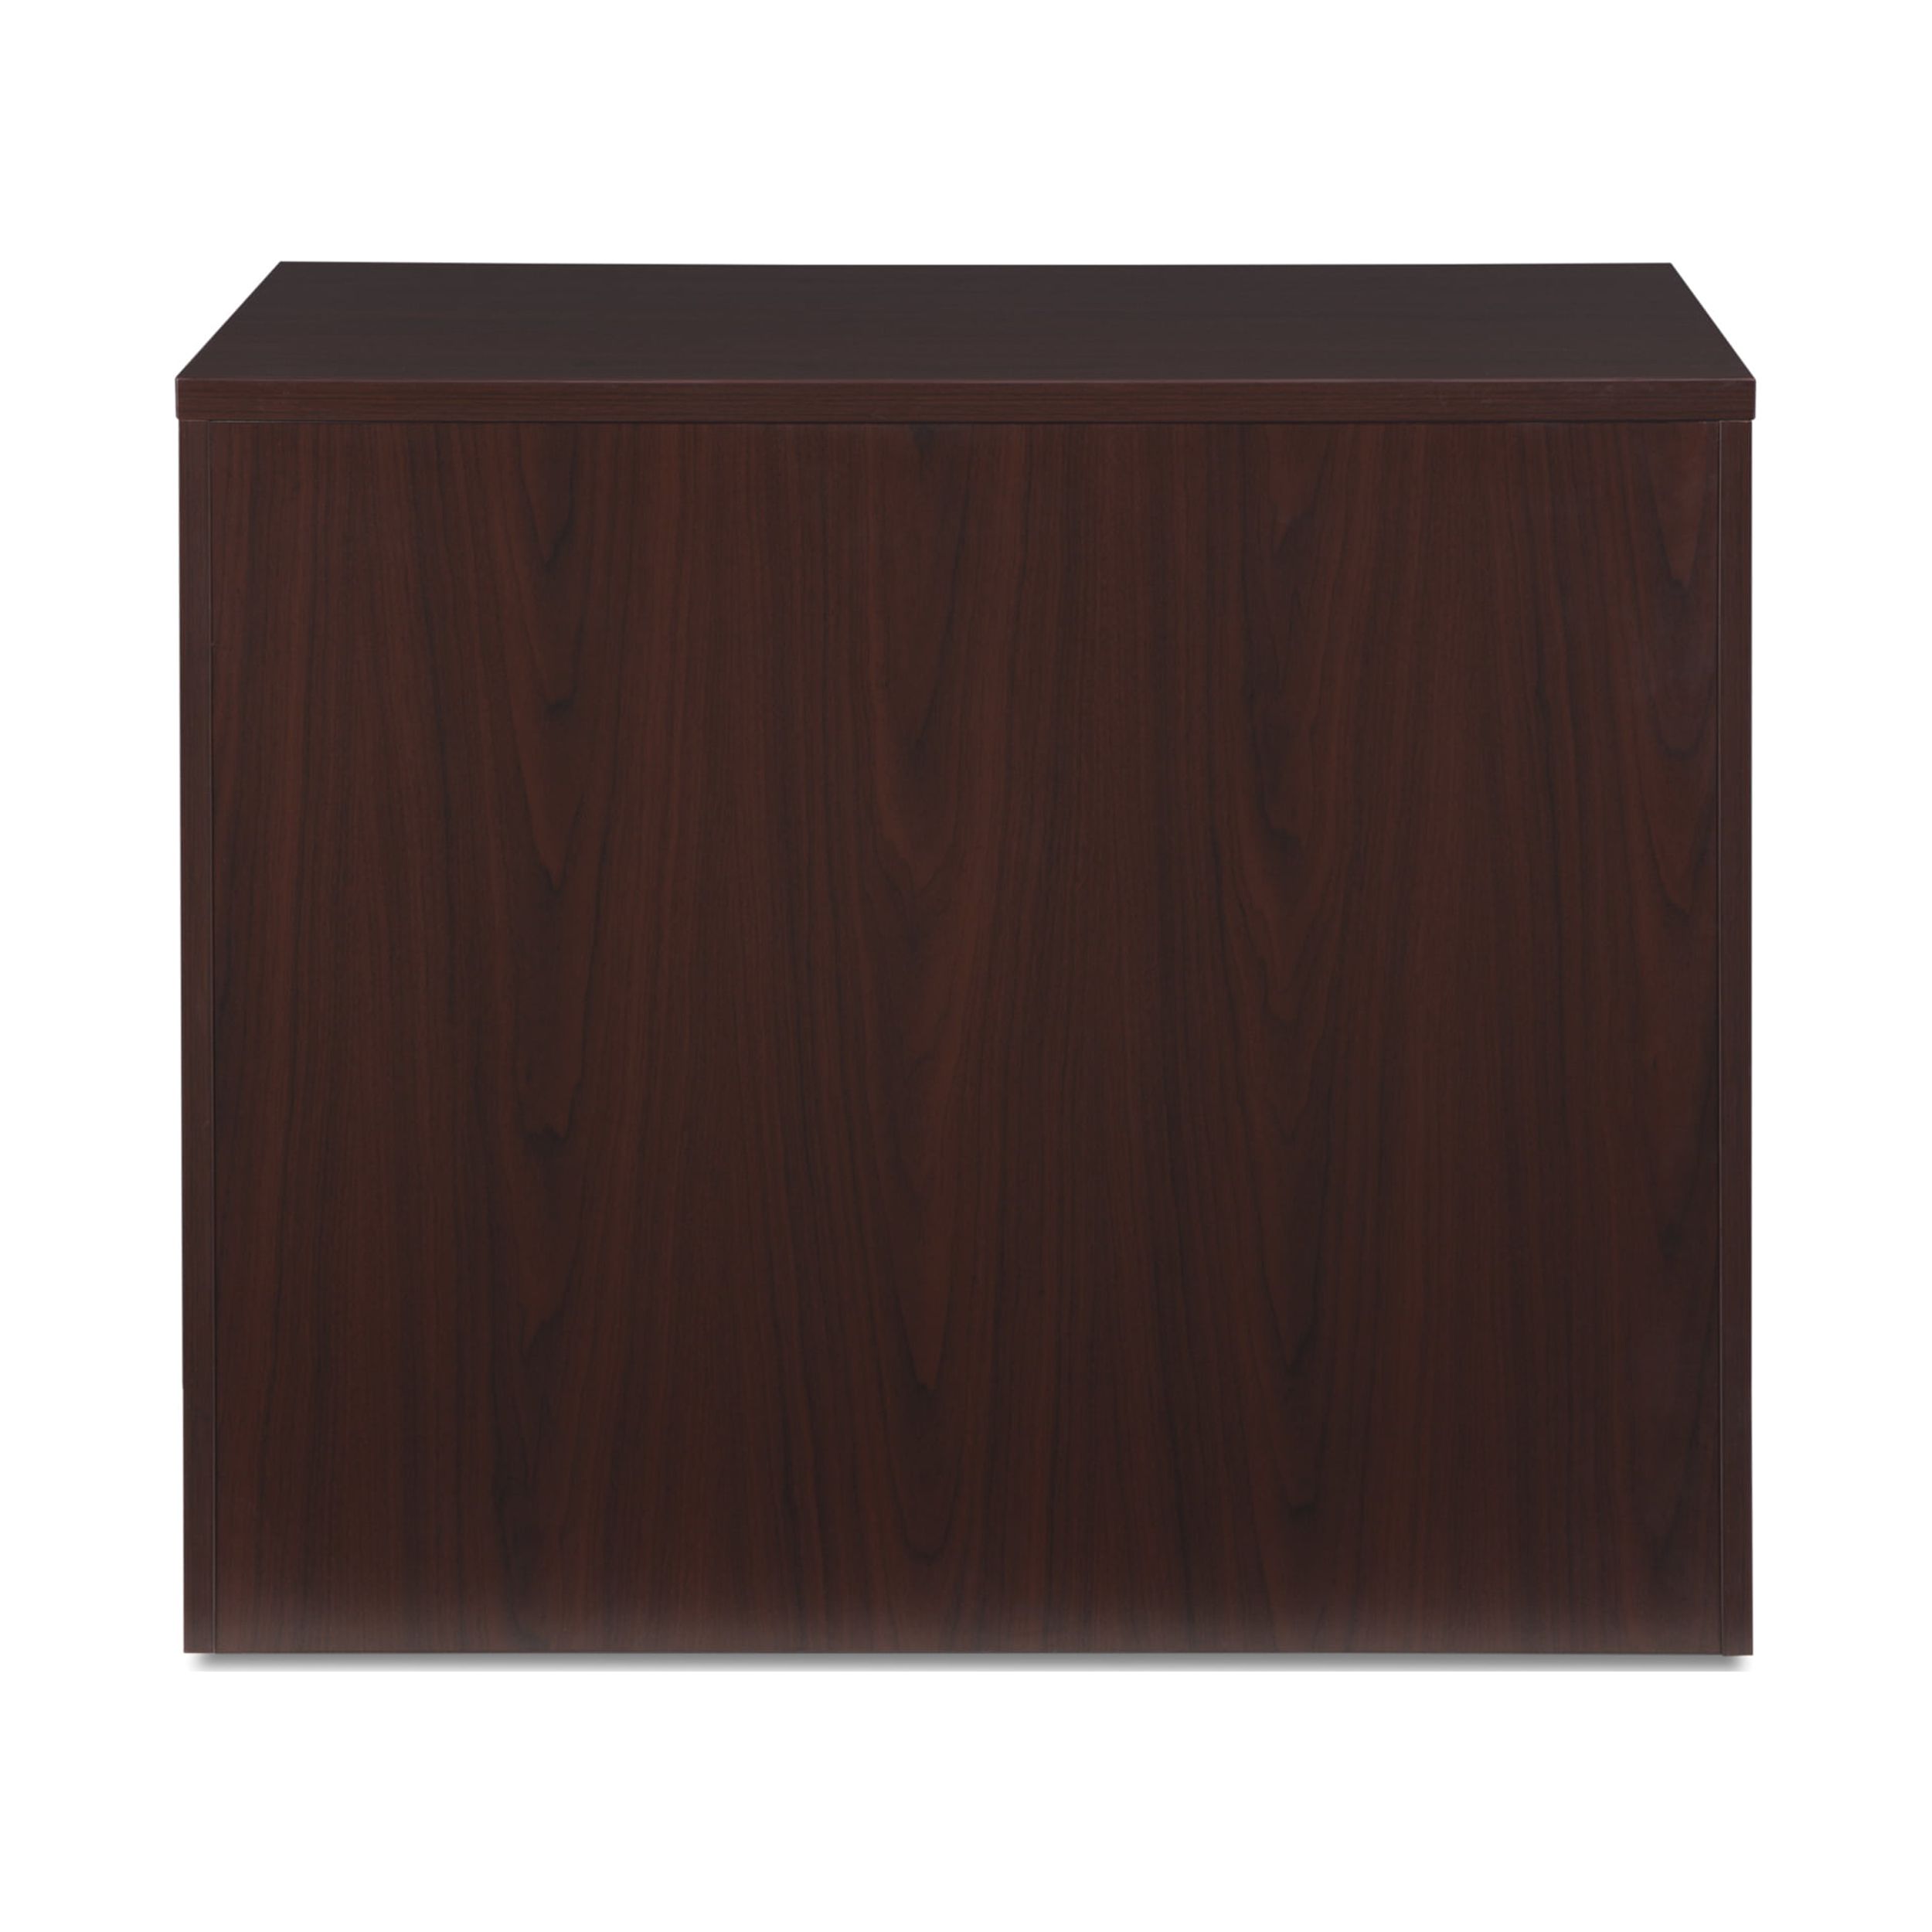 OFM Fulcrum Series Locking Lateral File Cabinet, 2-Drawer Filing Cabinet, Mahogany (CL-L36W-MHG) - image 3 of 9